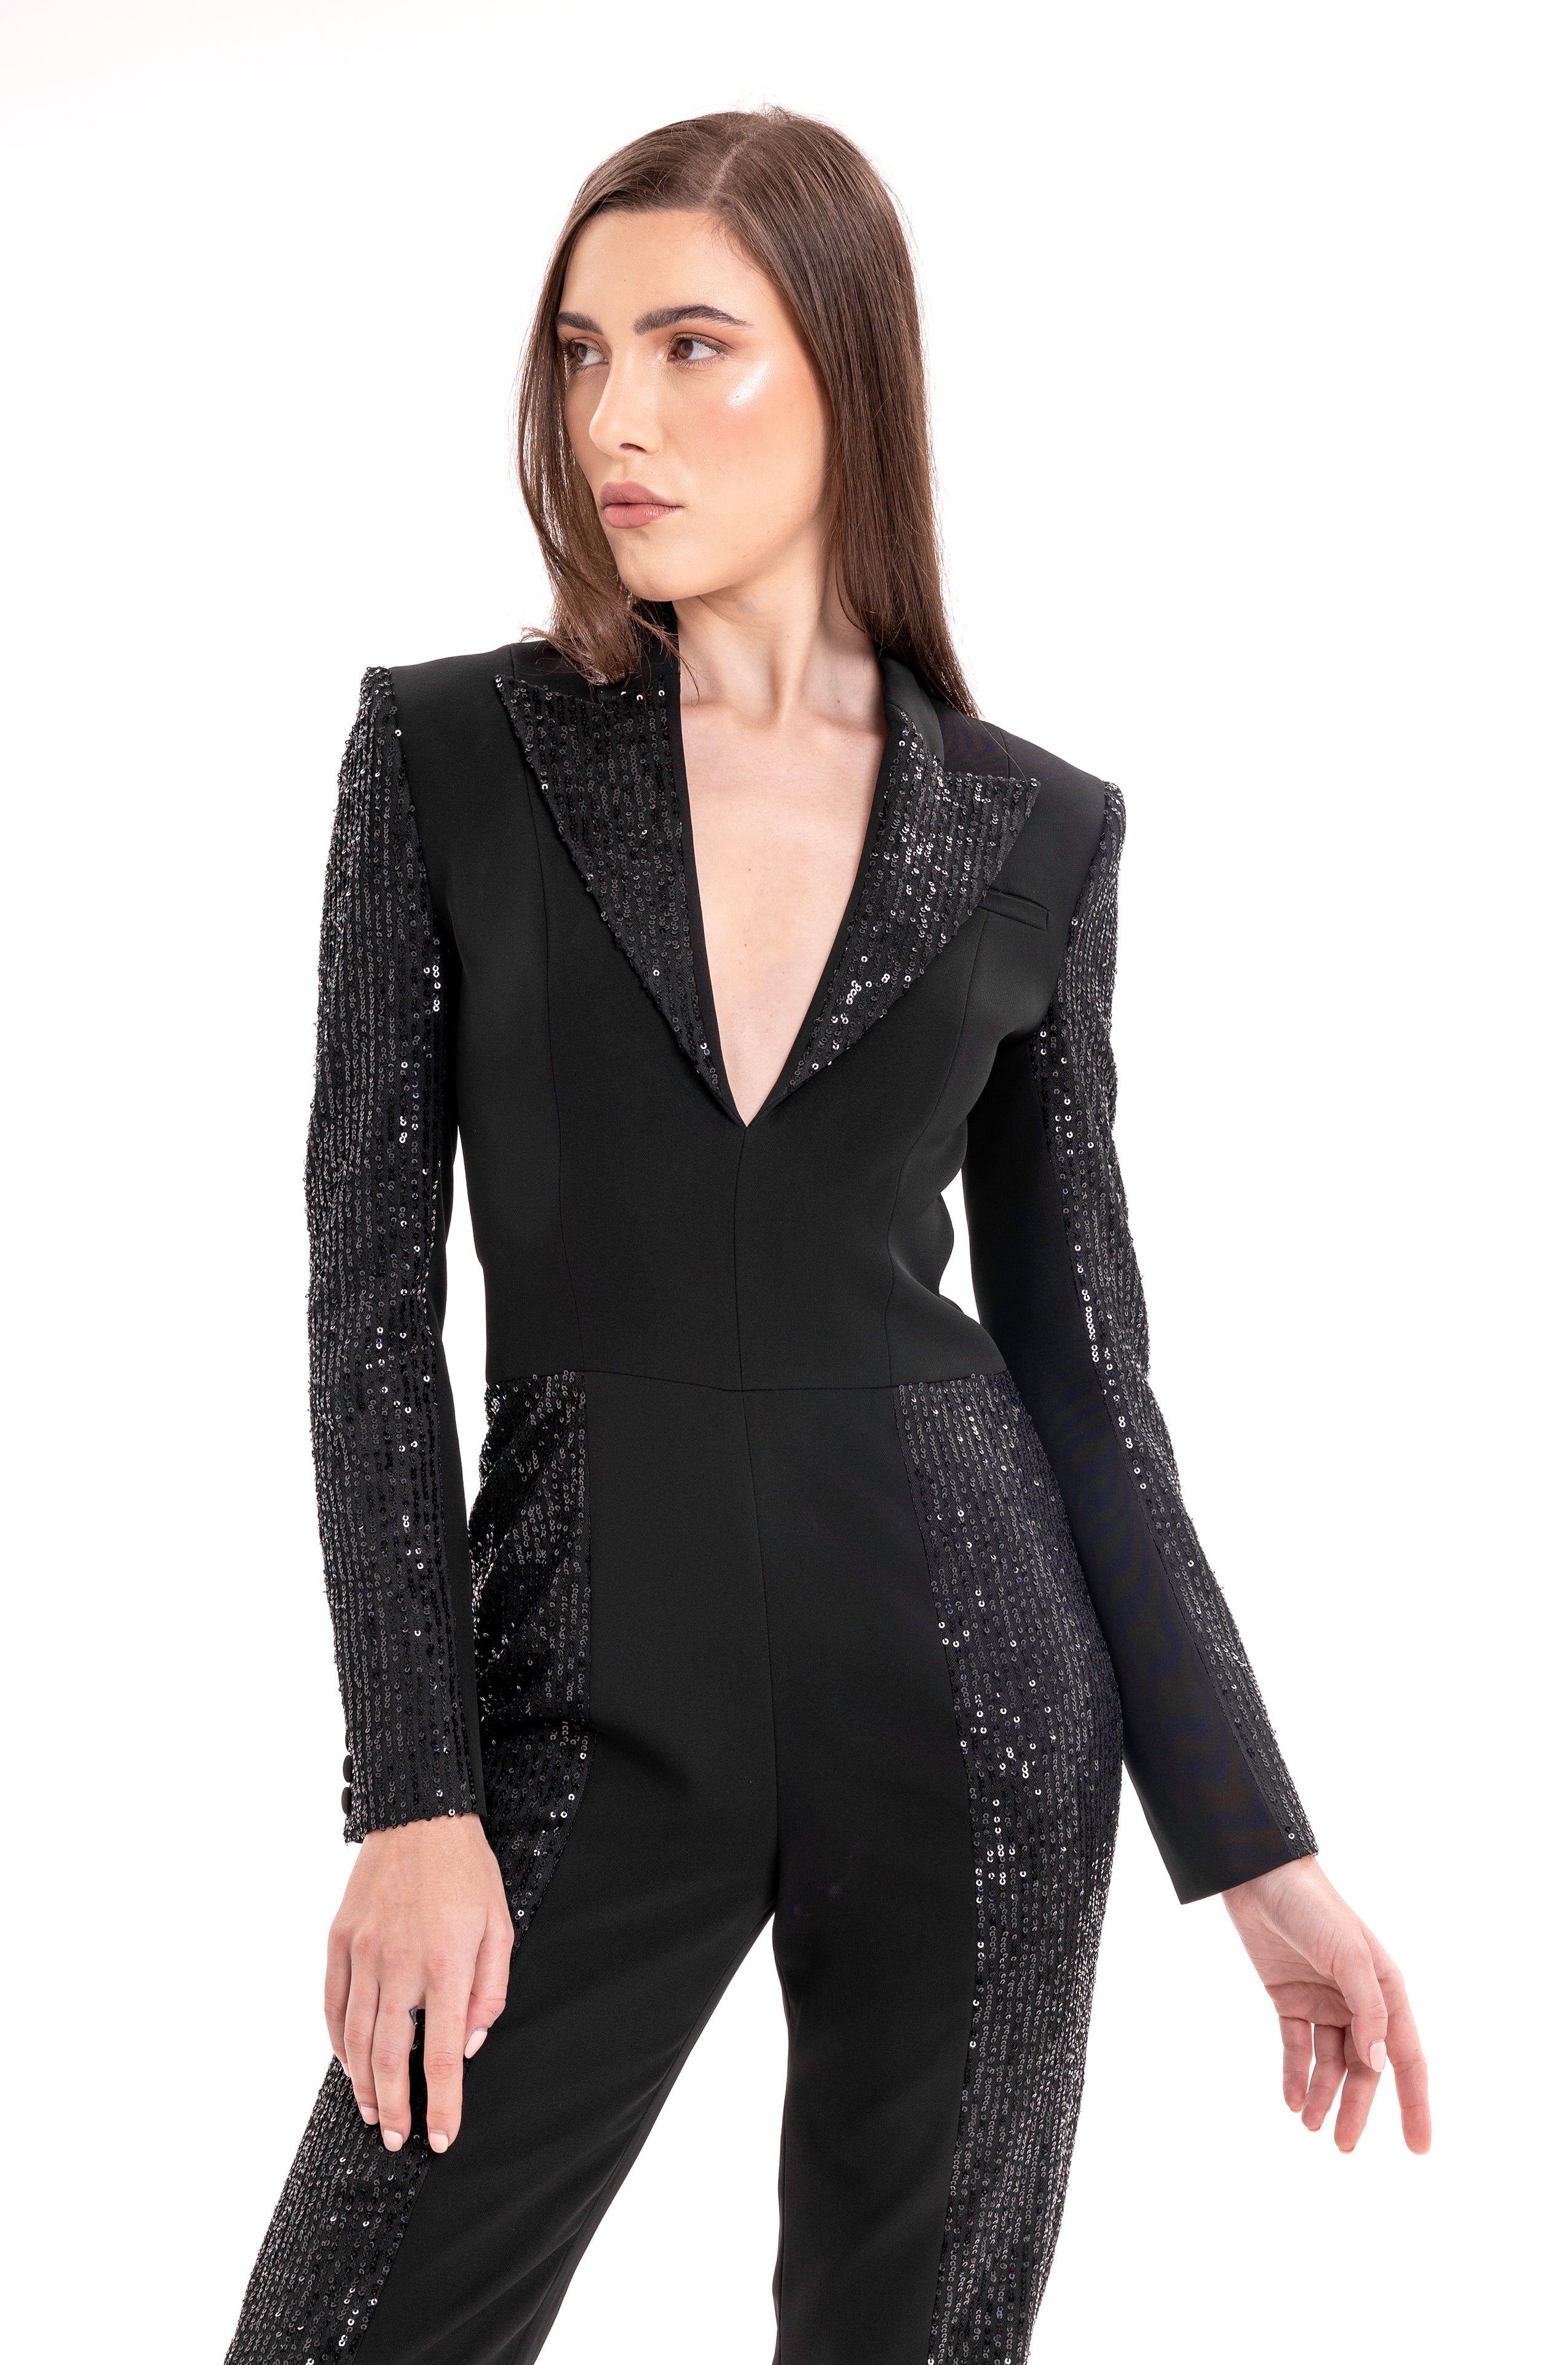 The Modern Sequin Jumpsuit By Lili Blanc